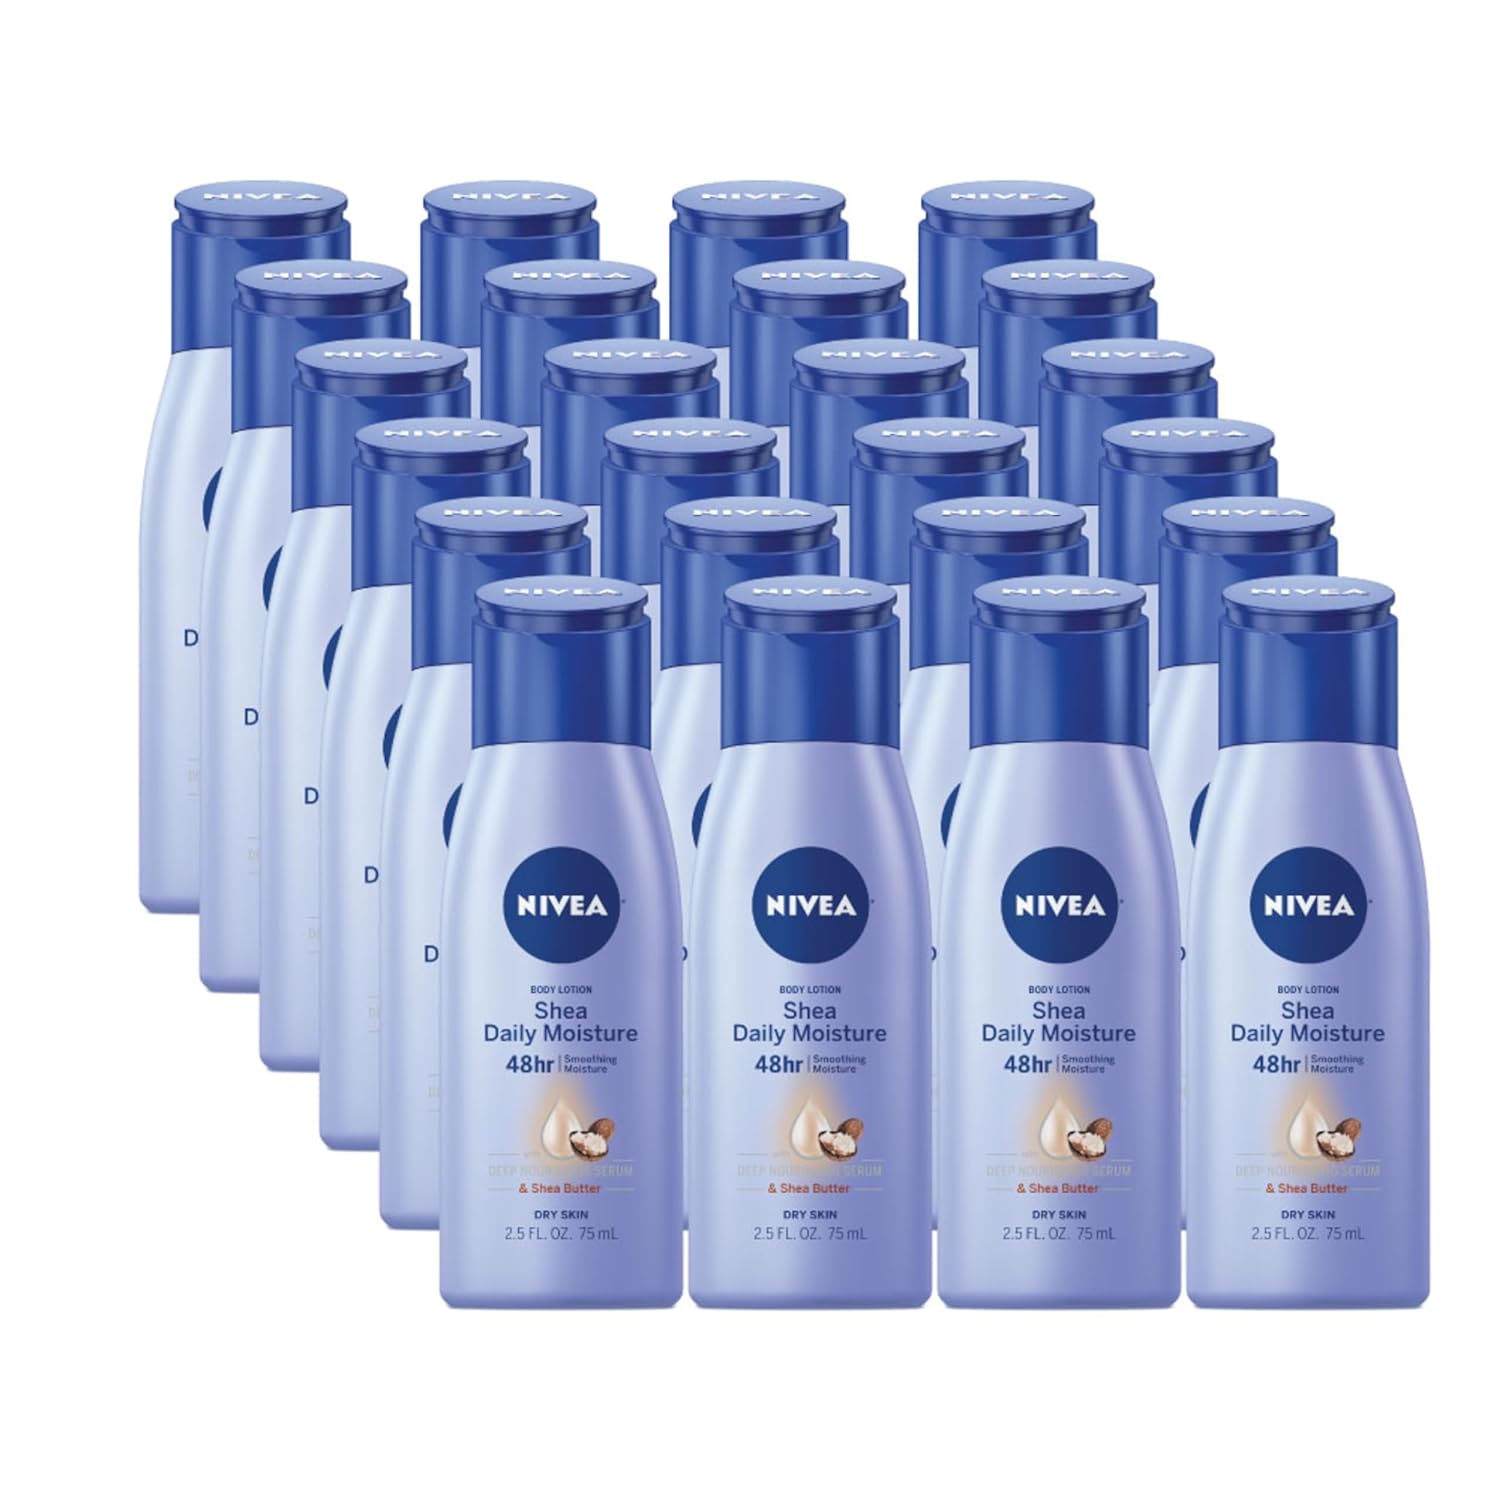 NIVEA Shea Nourish Body Lotion, Dry Skin Lotion with Shea Butter, 2.5 Fl Oz Travel Size Toiletries (Pack of 24)